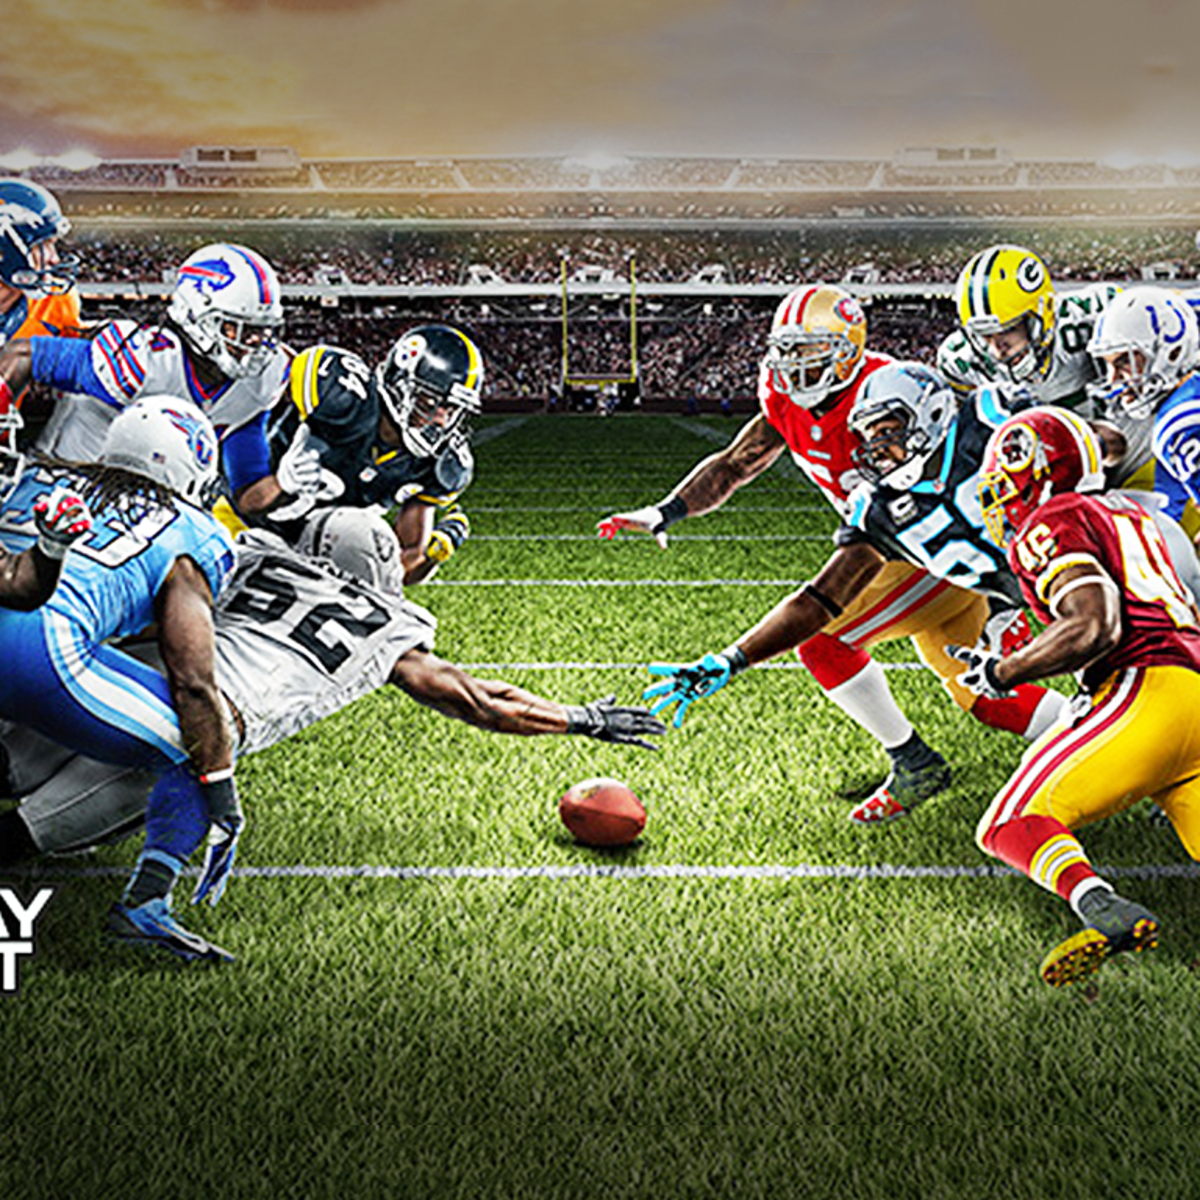 nfl sunday ticket deal with directv